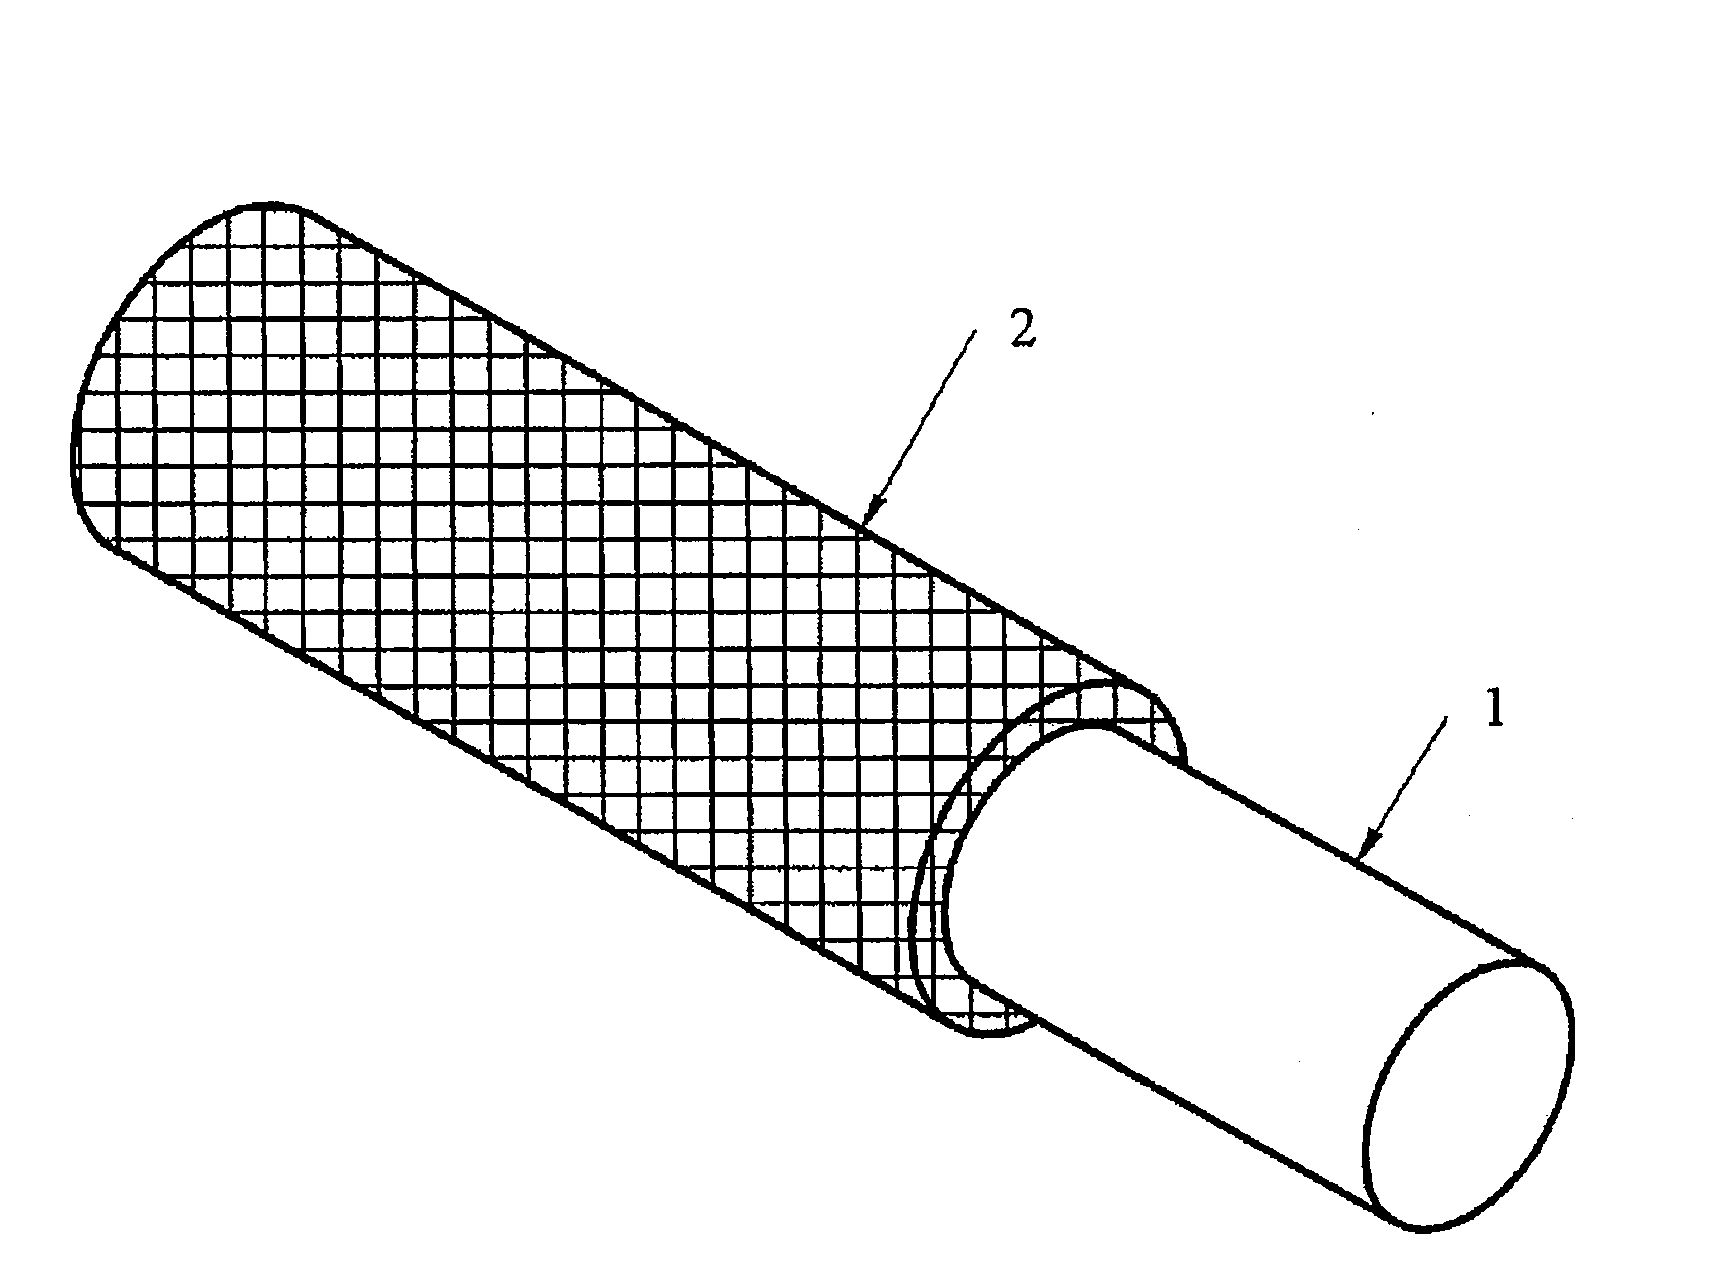 Brazing Material Containing A Flux